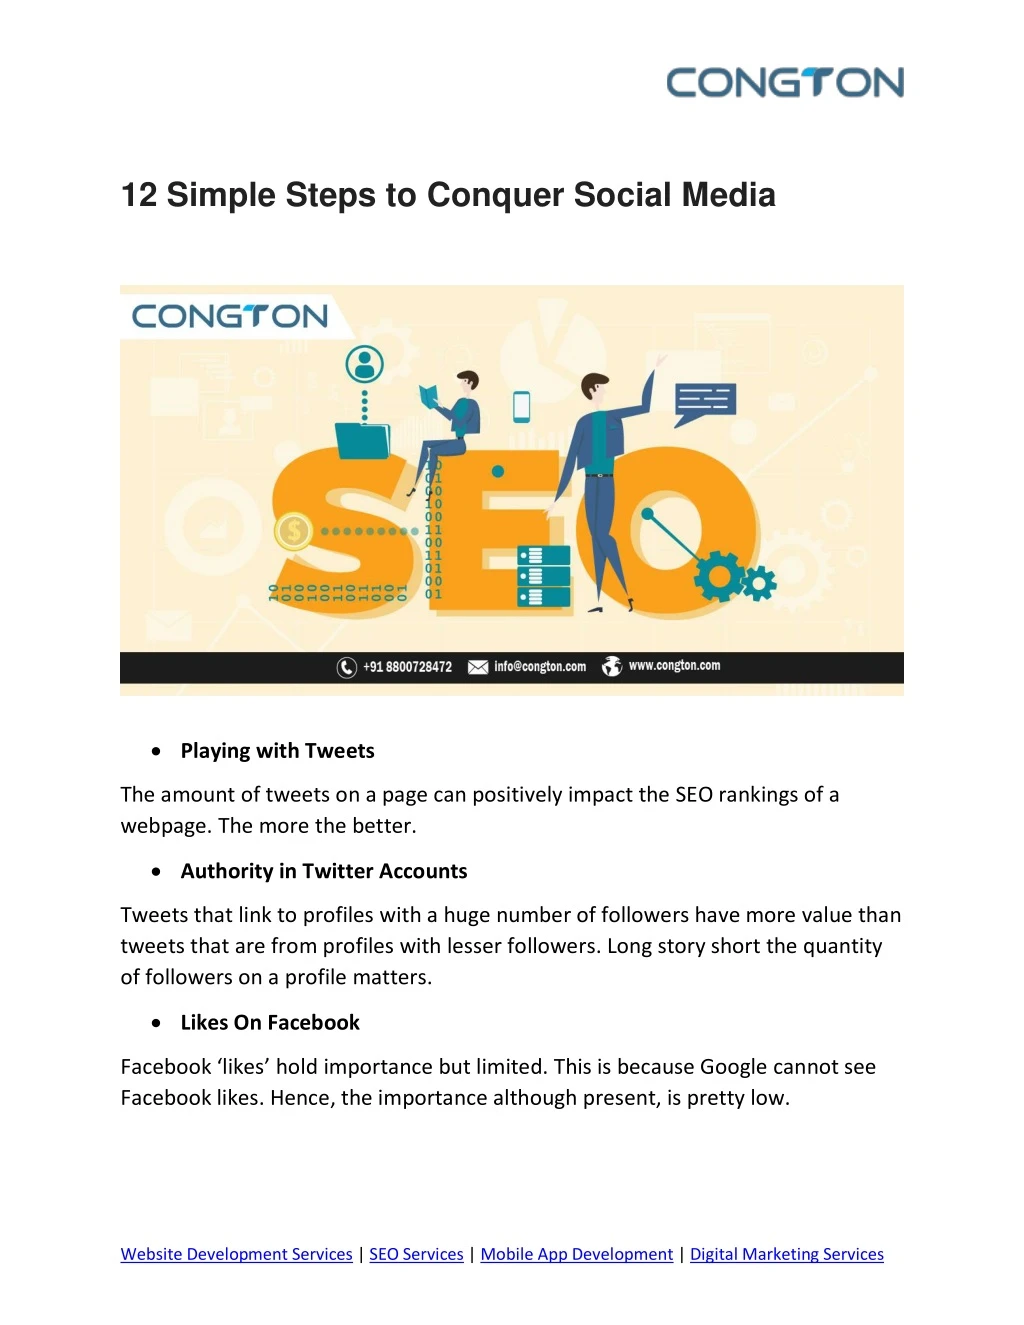 12 simple steps to conquer social media